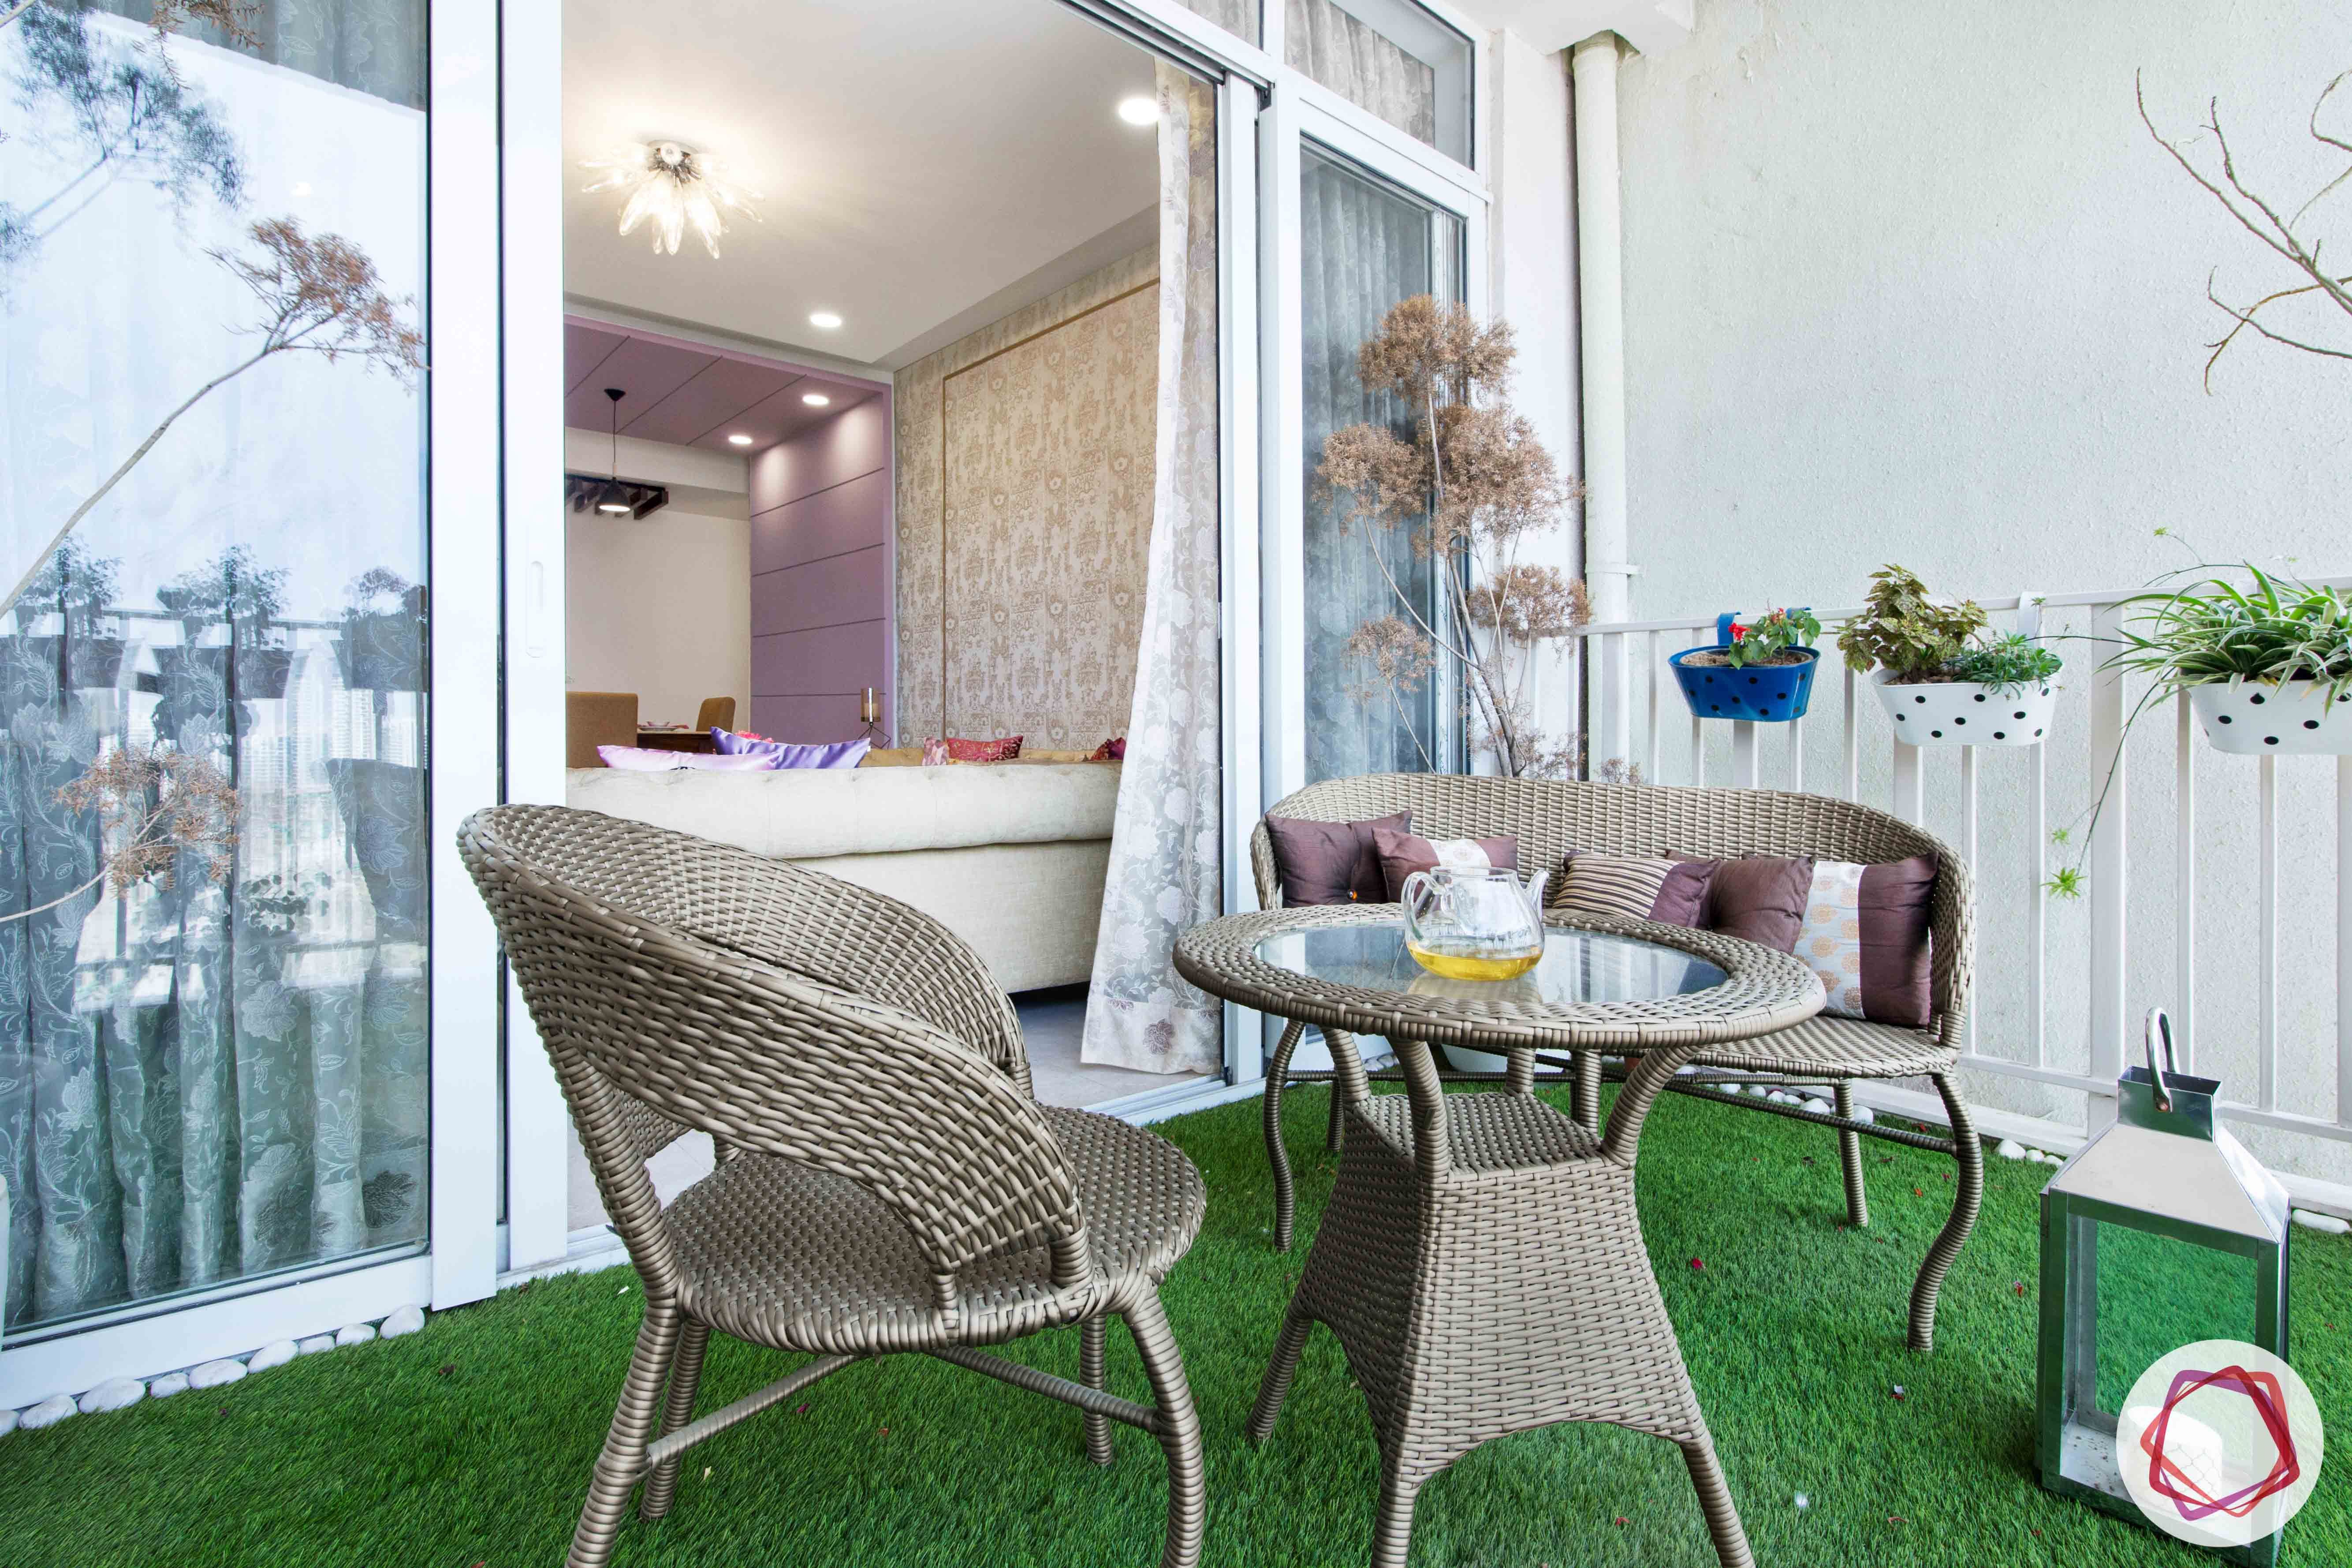 ireo victory valley-balcony seating-cane furniture-artificial turf